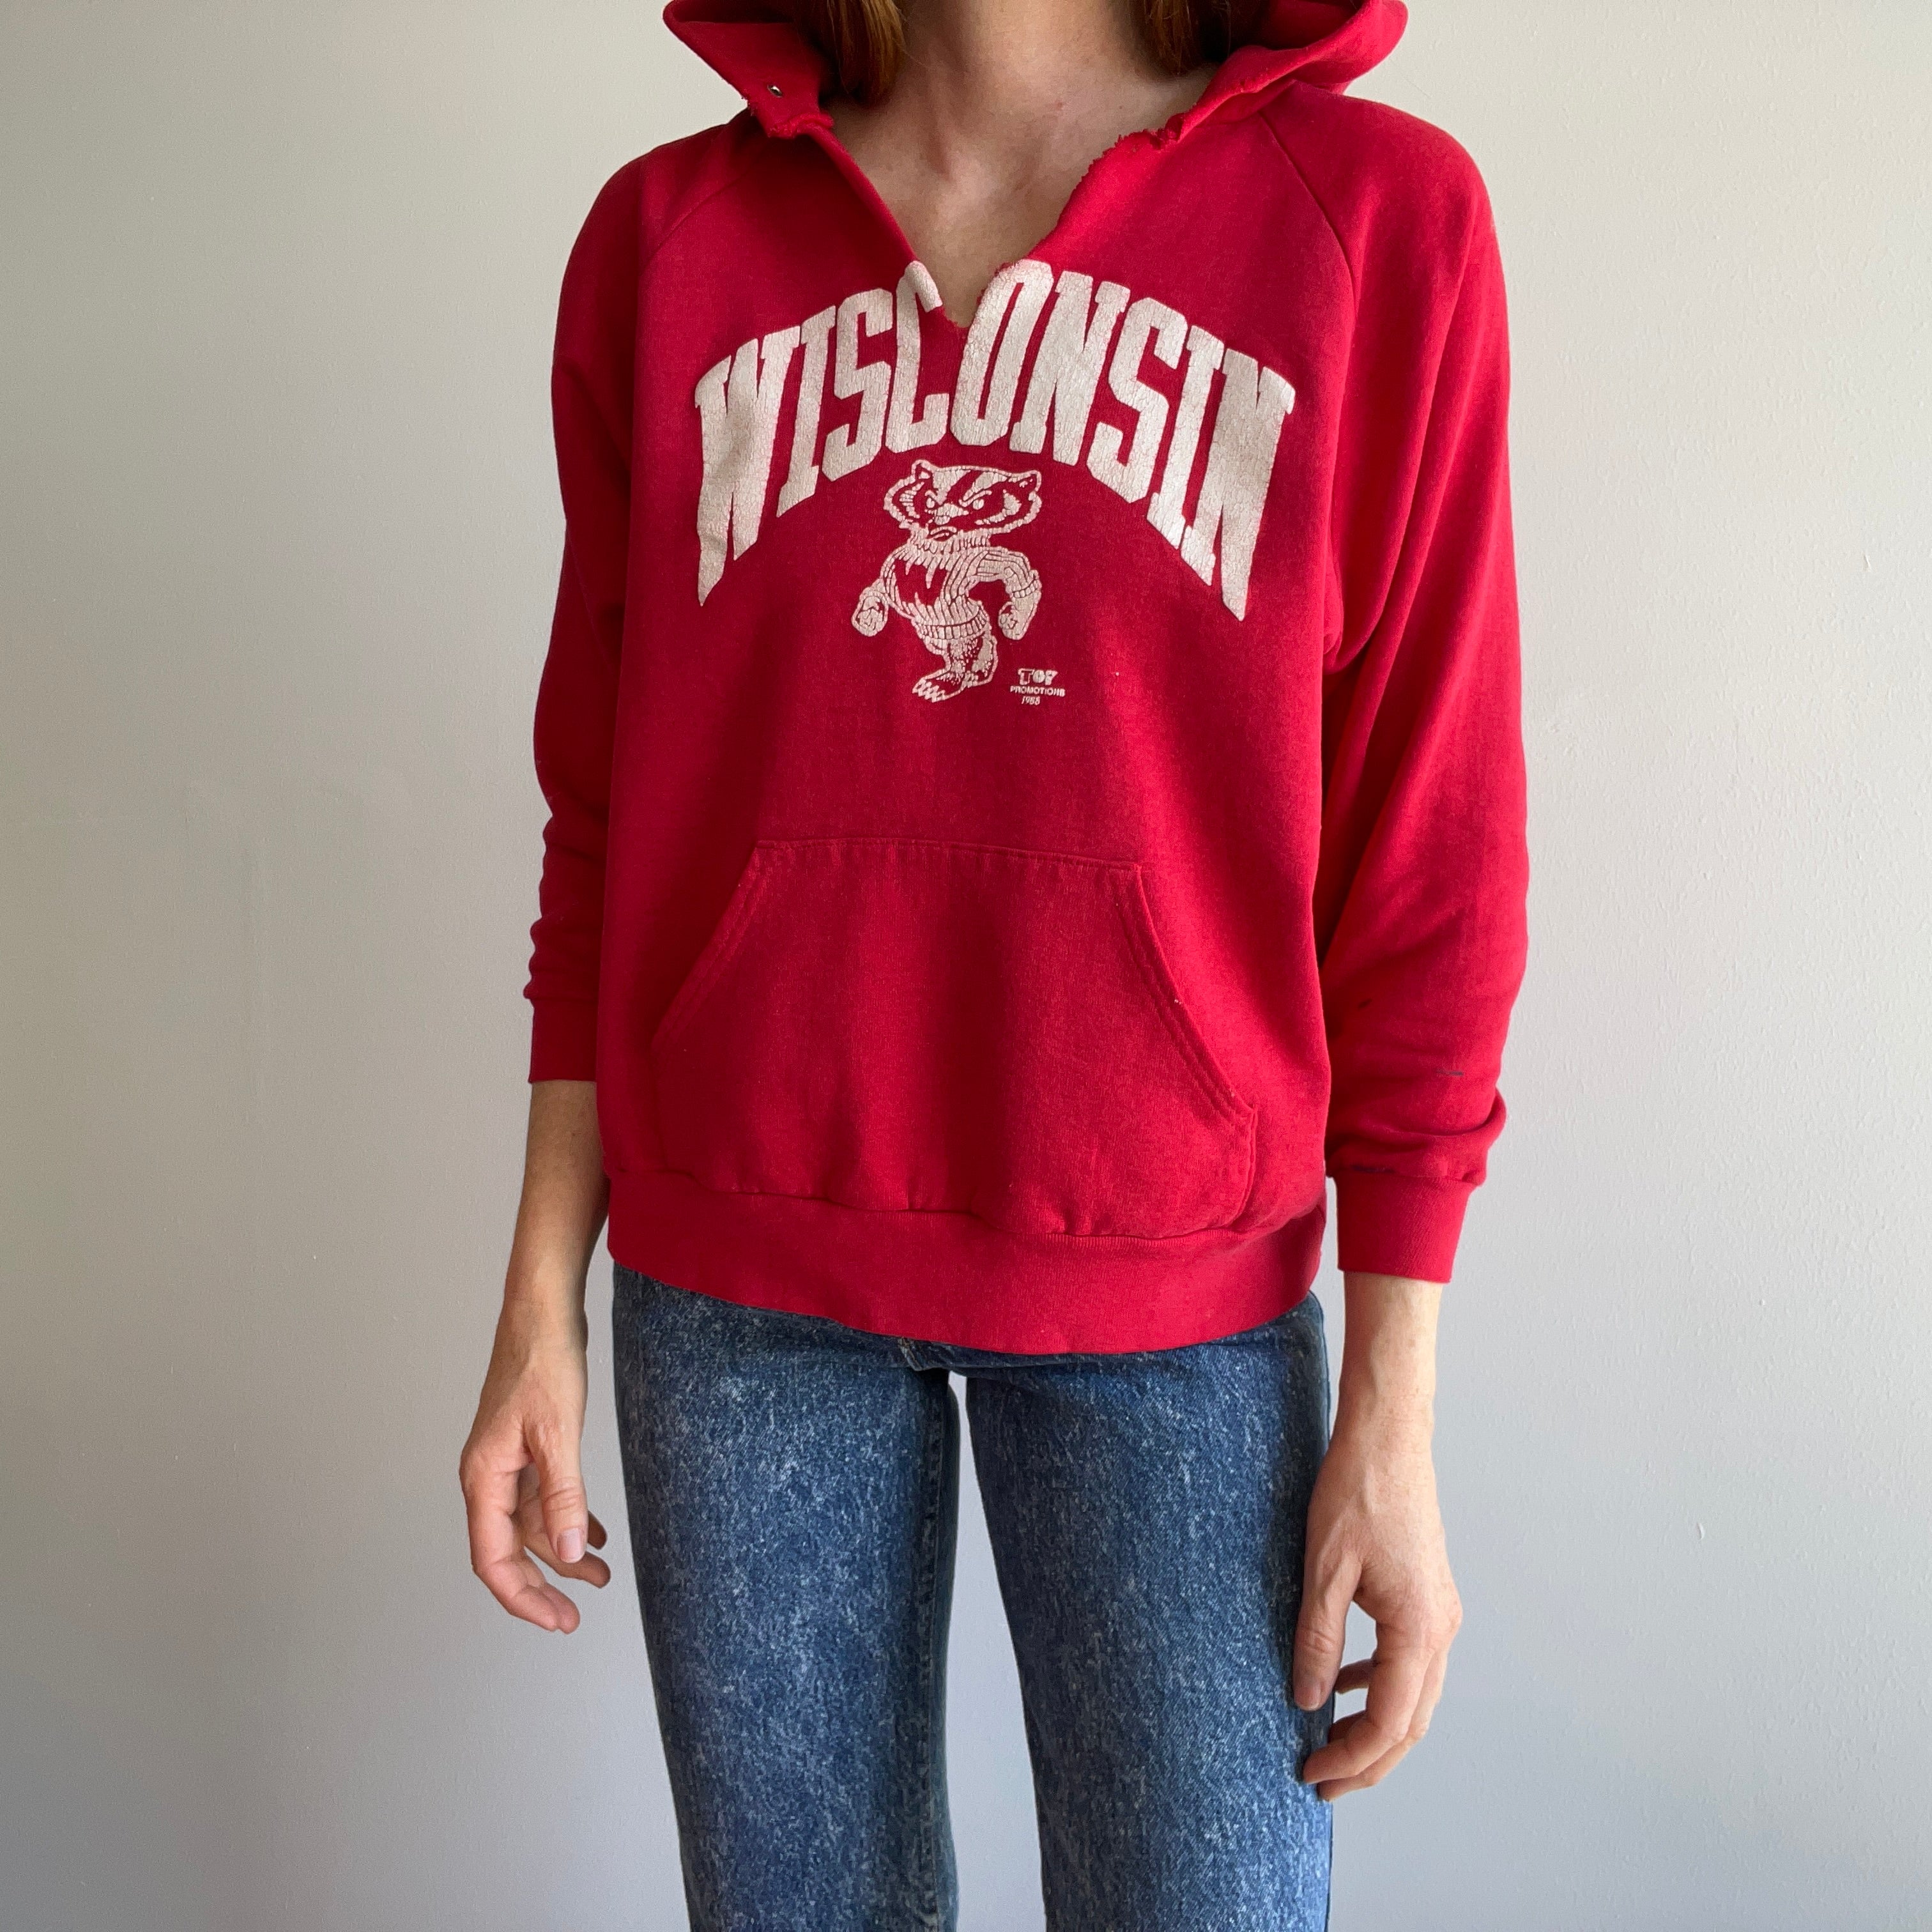 1988 Perfectly Worn Paint Stained and Thin Wisconsin Hoodie